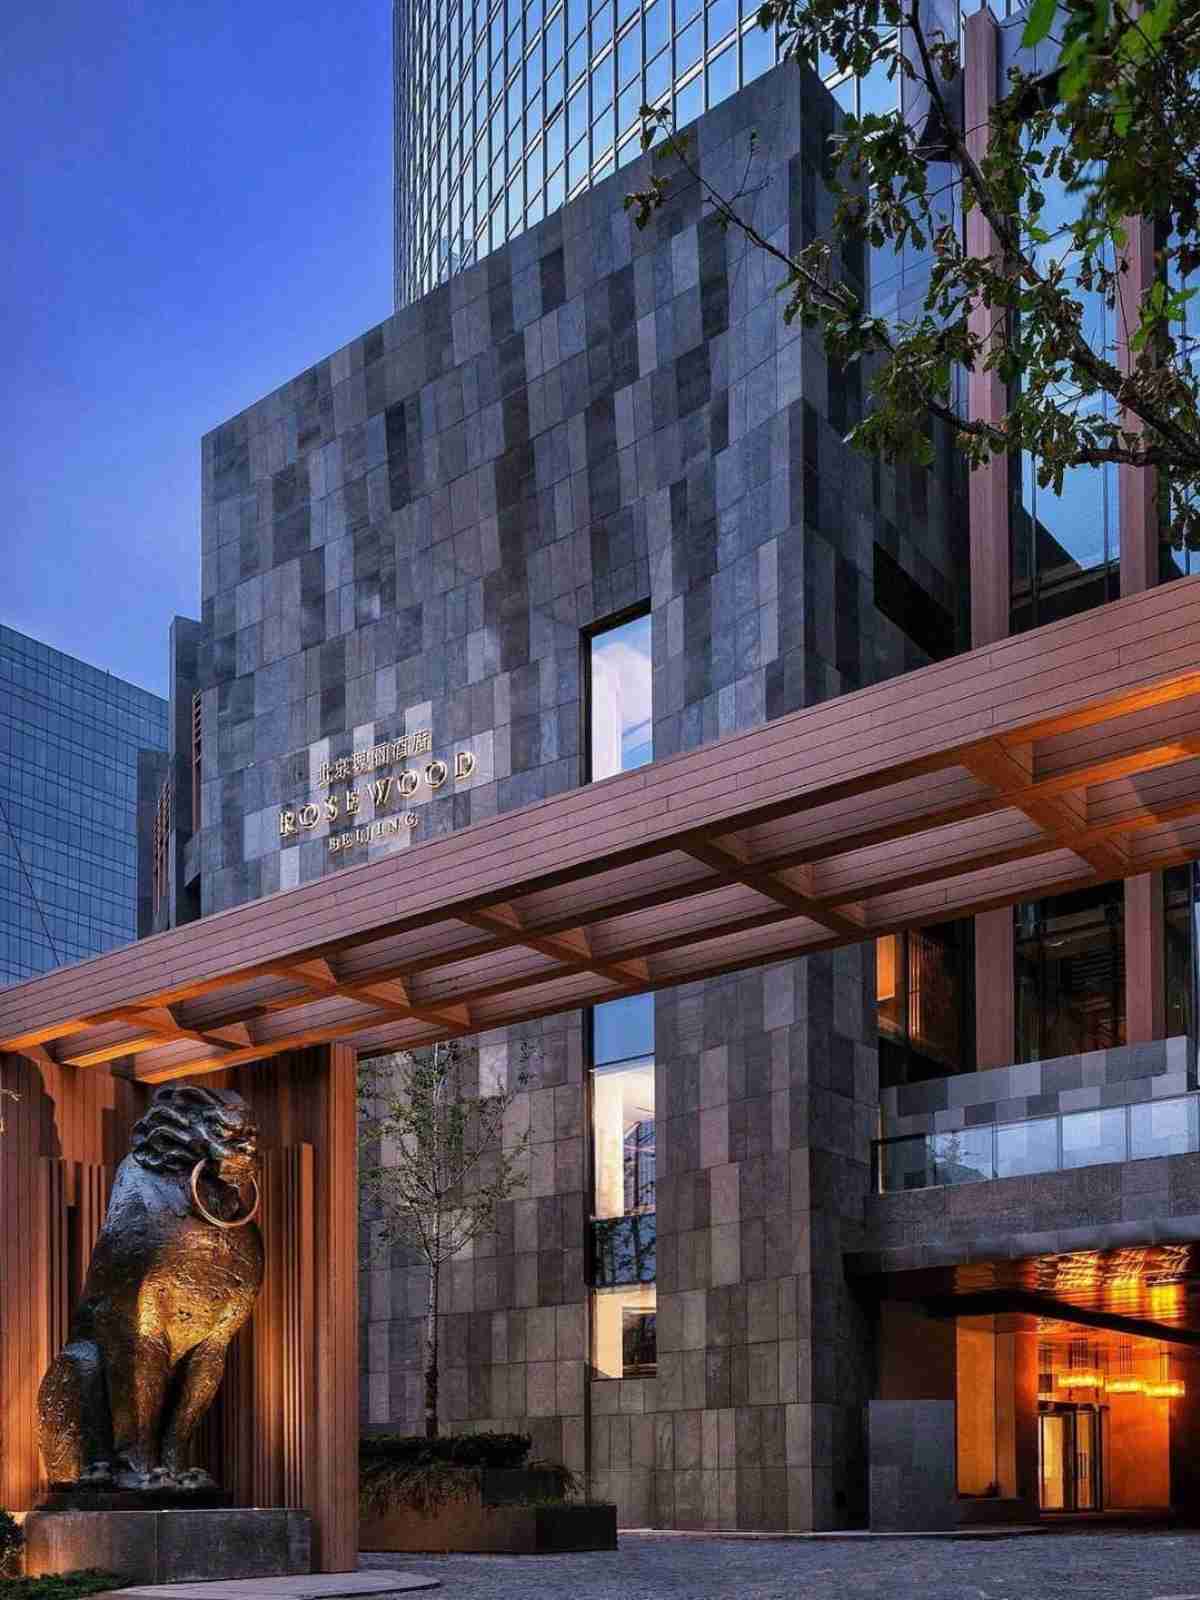 The gate of Rosewood Hotel Beijing